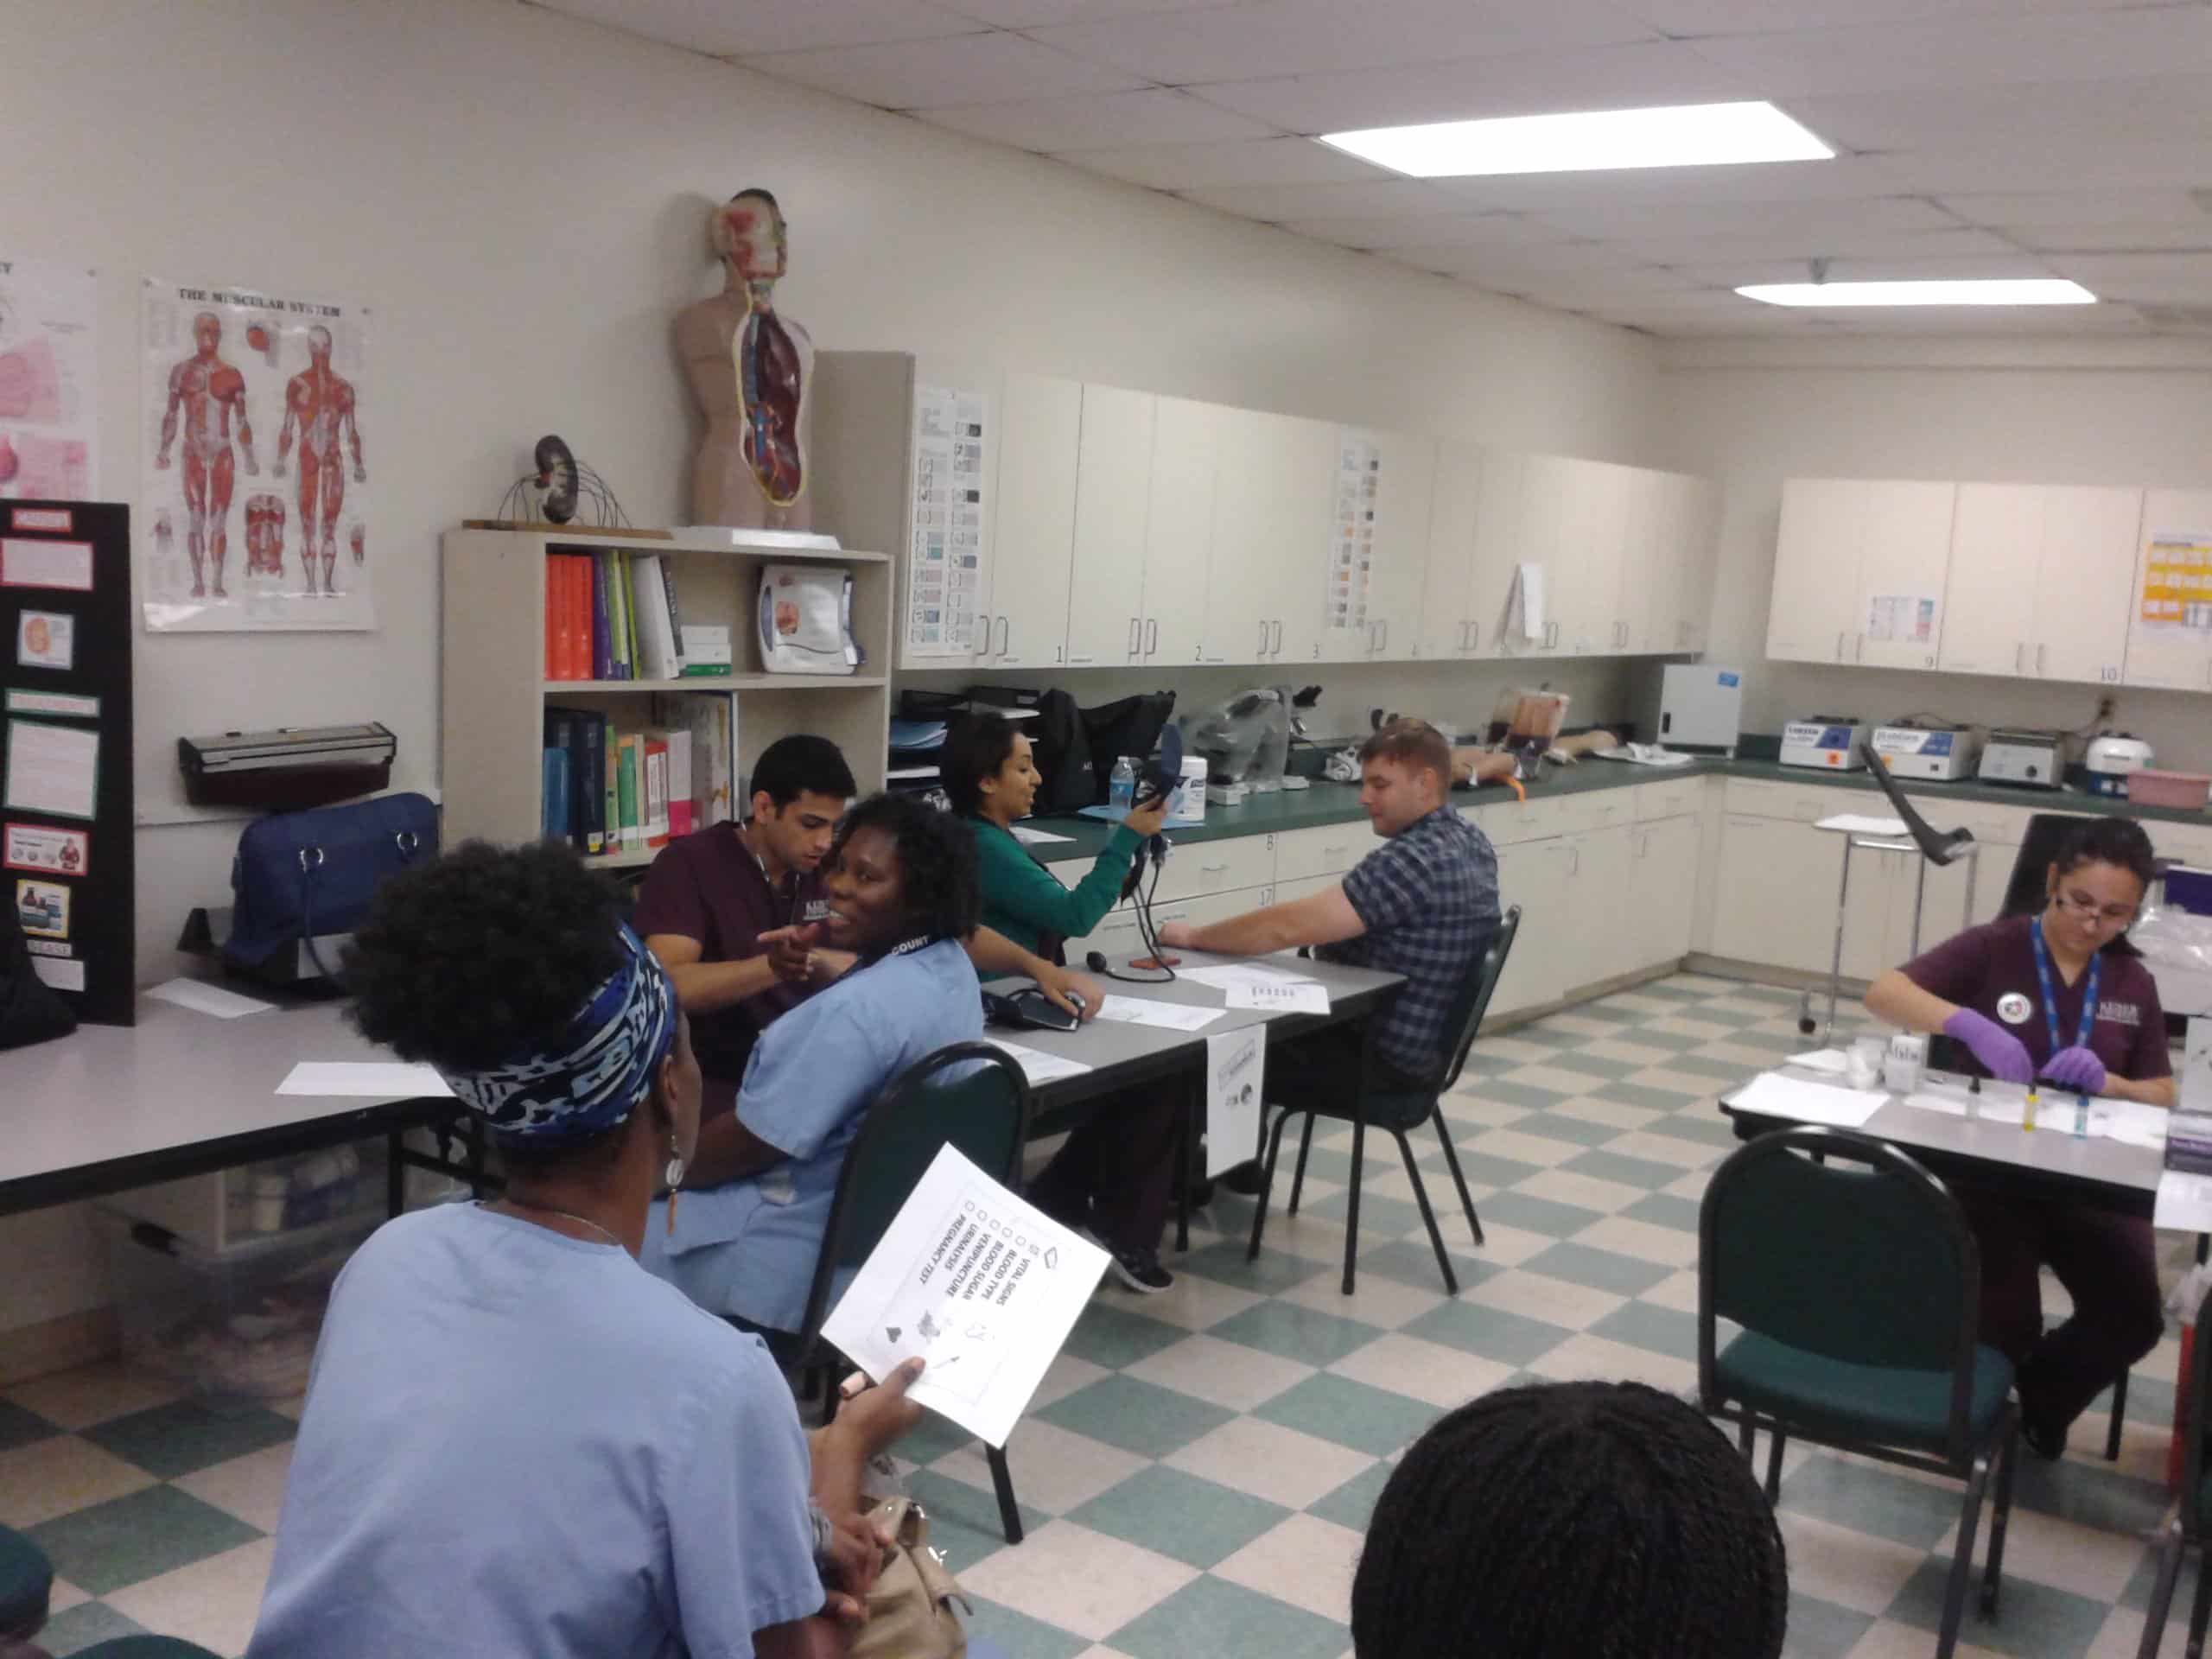 Orlando’s Medical Assisting Students Hold an Open Lab